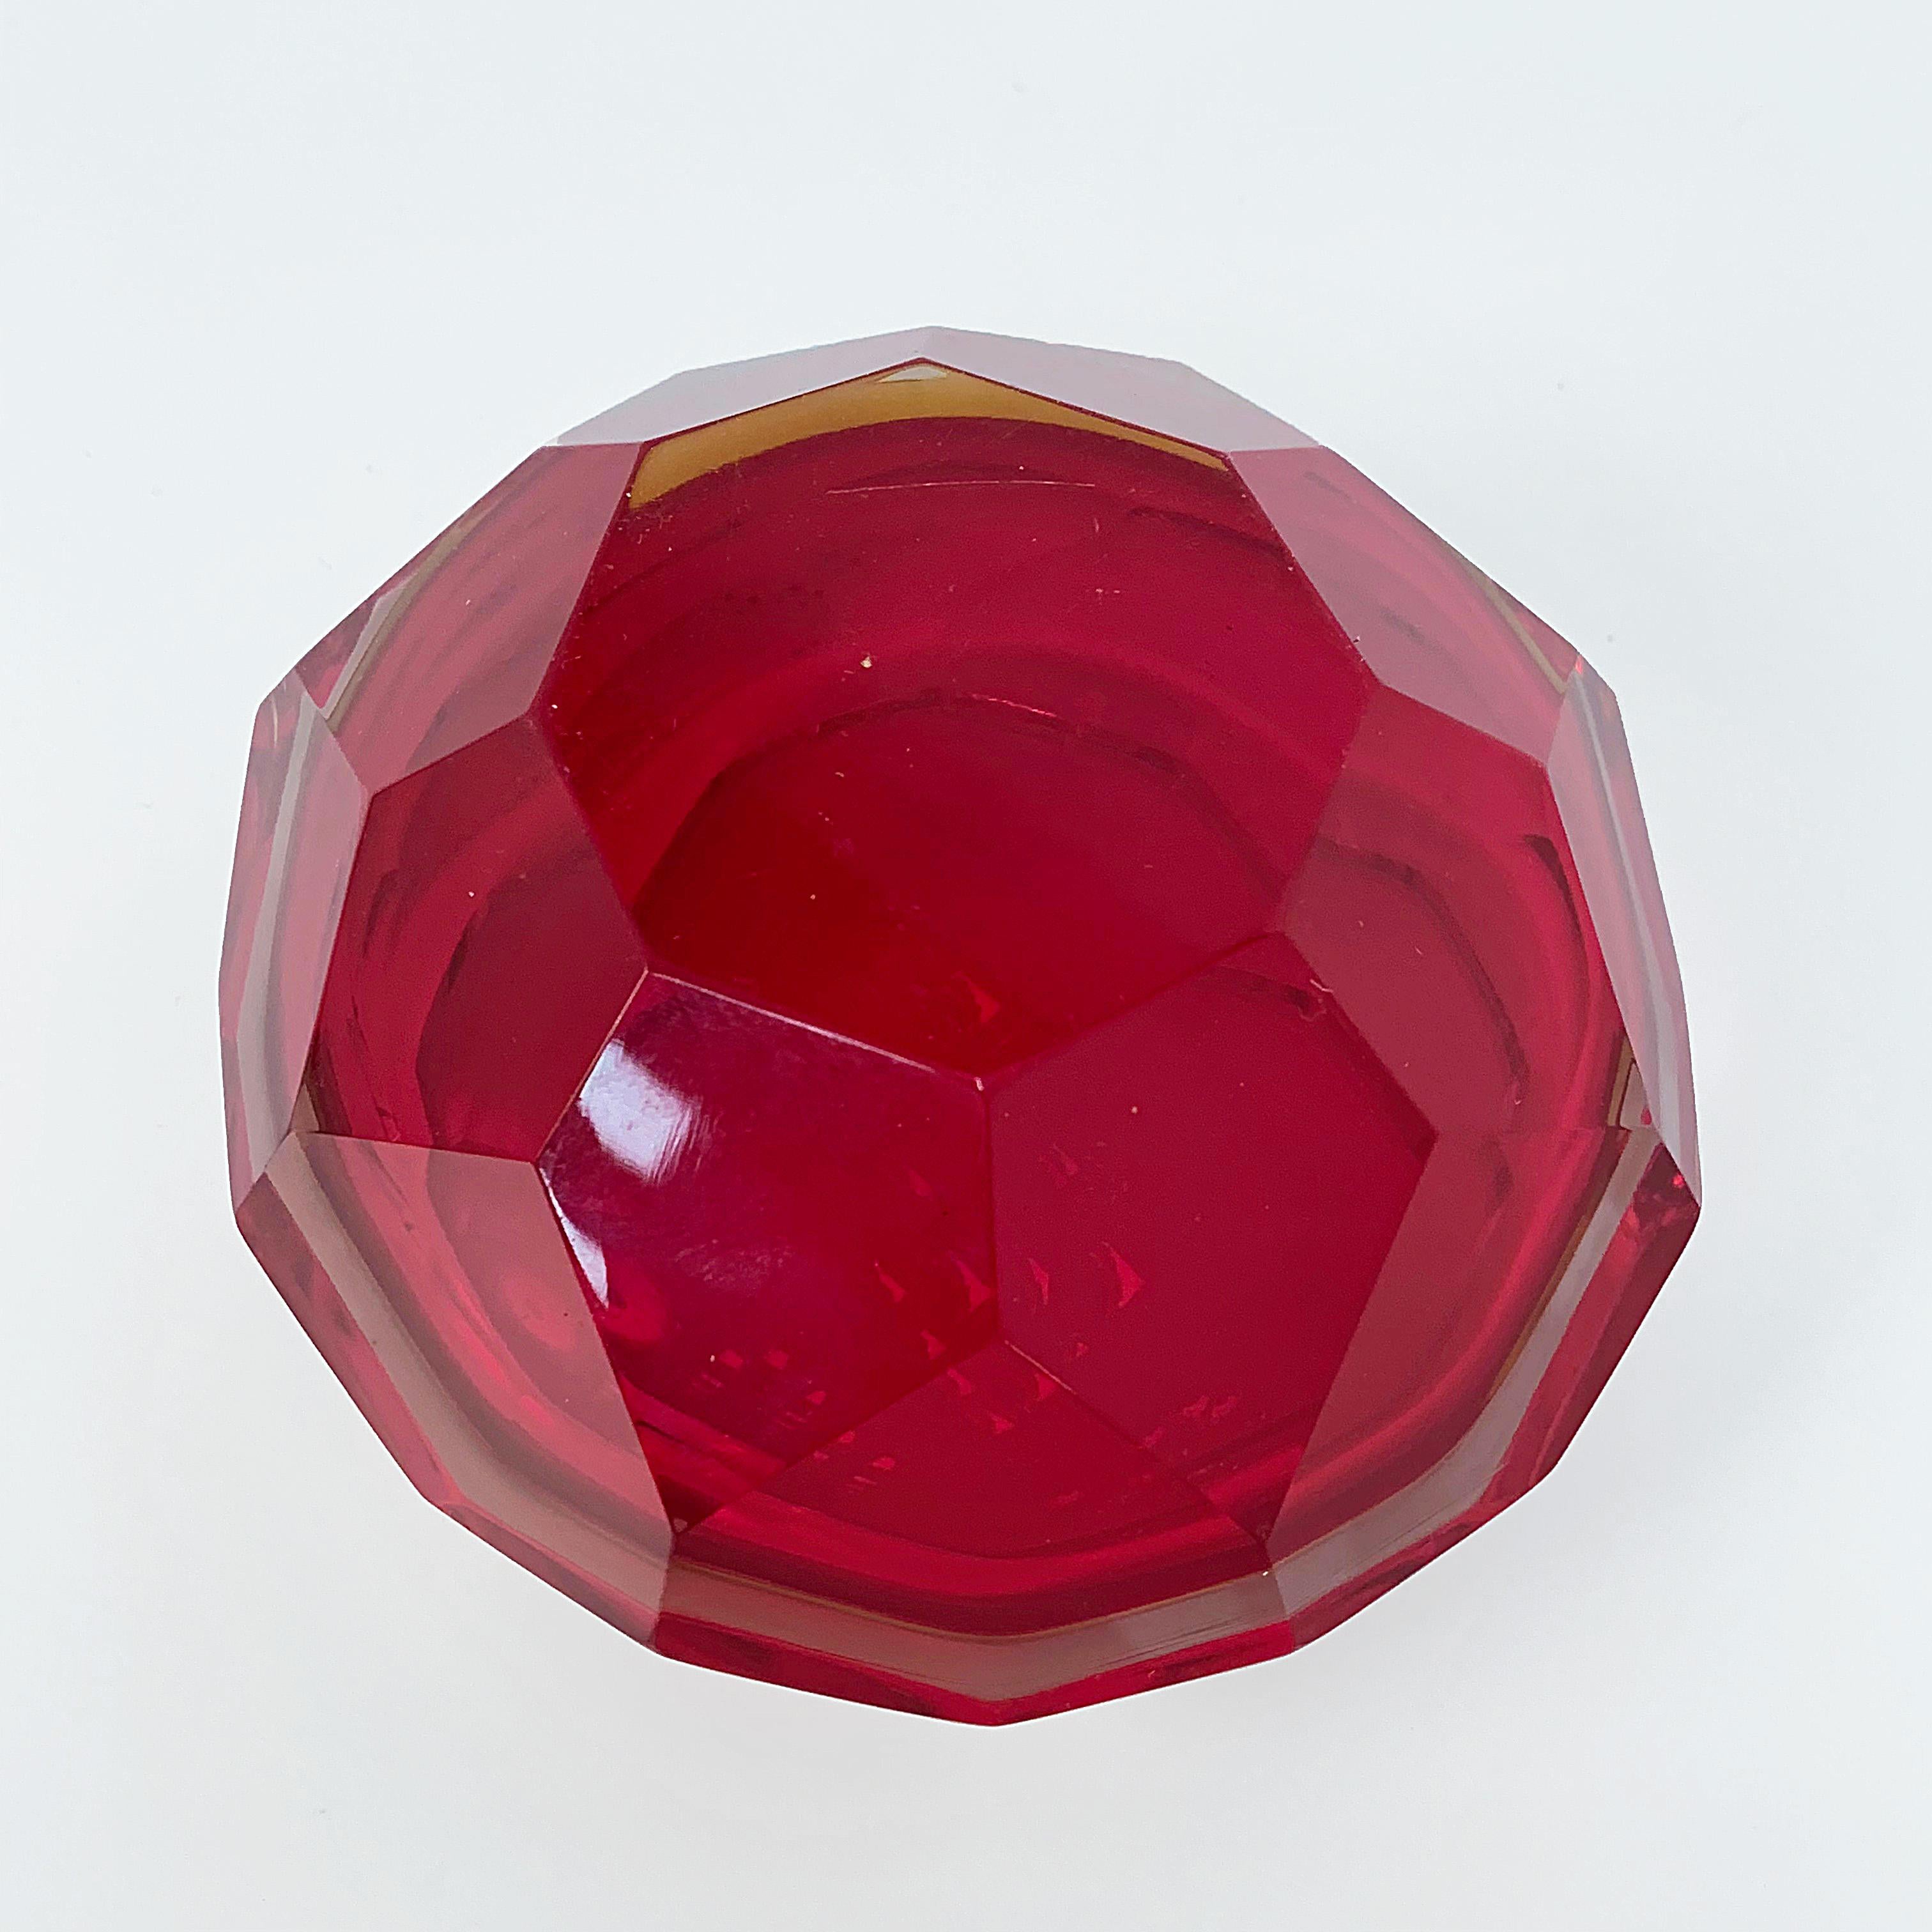 Murano Ashtray, Flavio Poli, Submerged Glass, Red Faceted Glass, Italy, 1950s For Sale 2